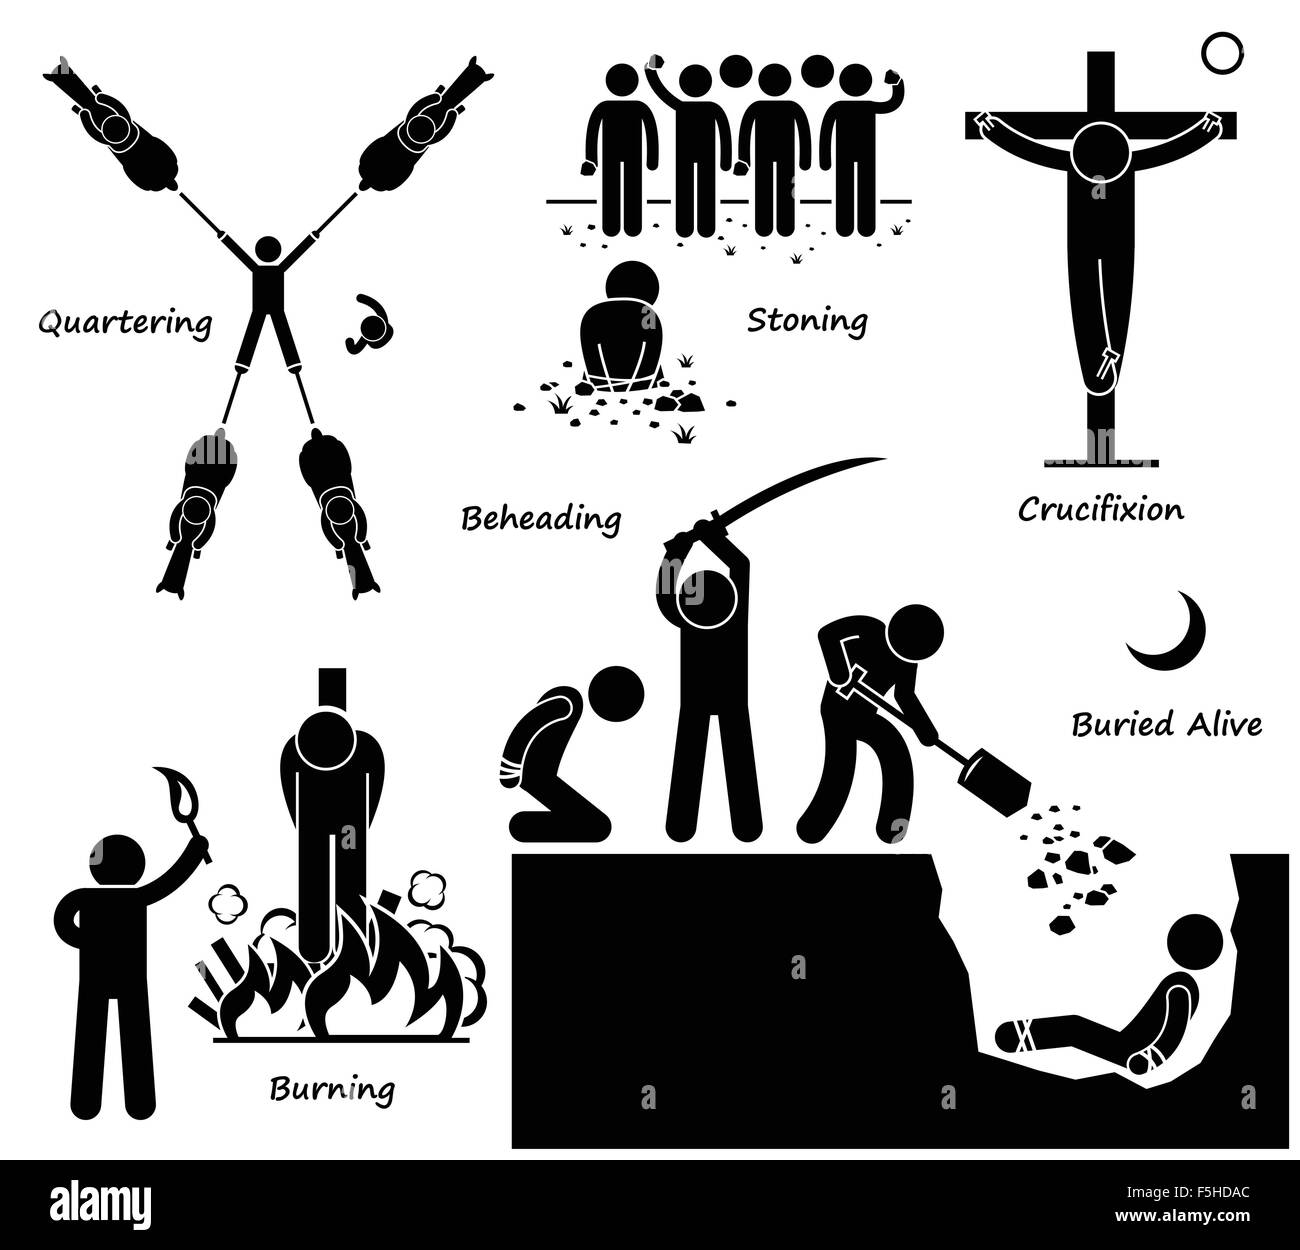 Execution Death Penalty Capital Punishment Ancient Methods Stick Figure Pictogram Icons Stock Vector